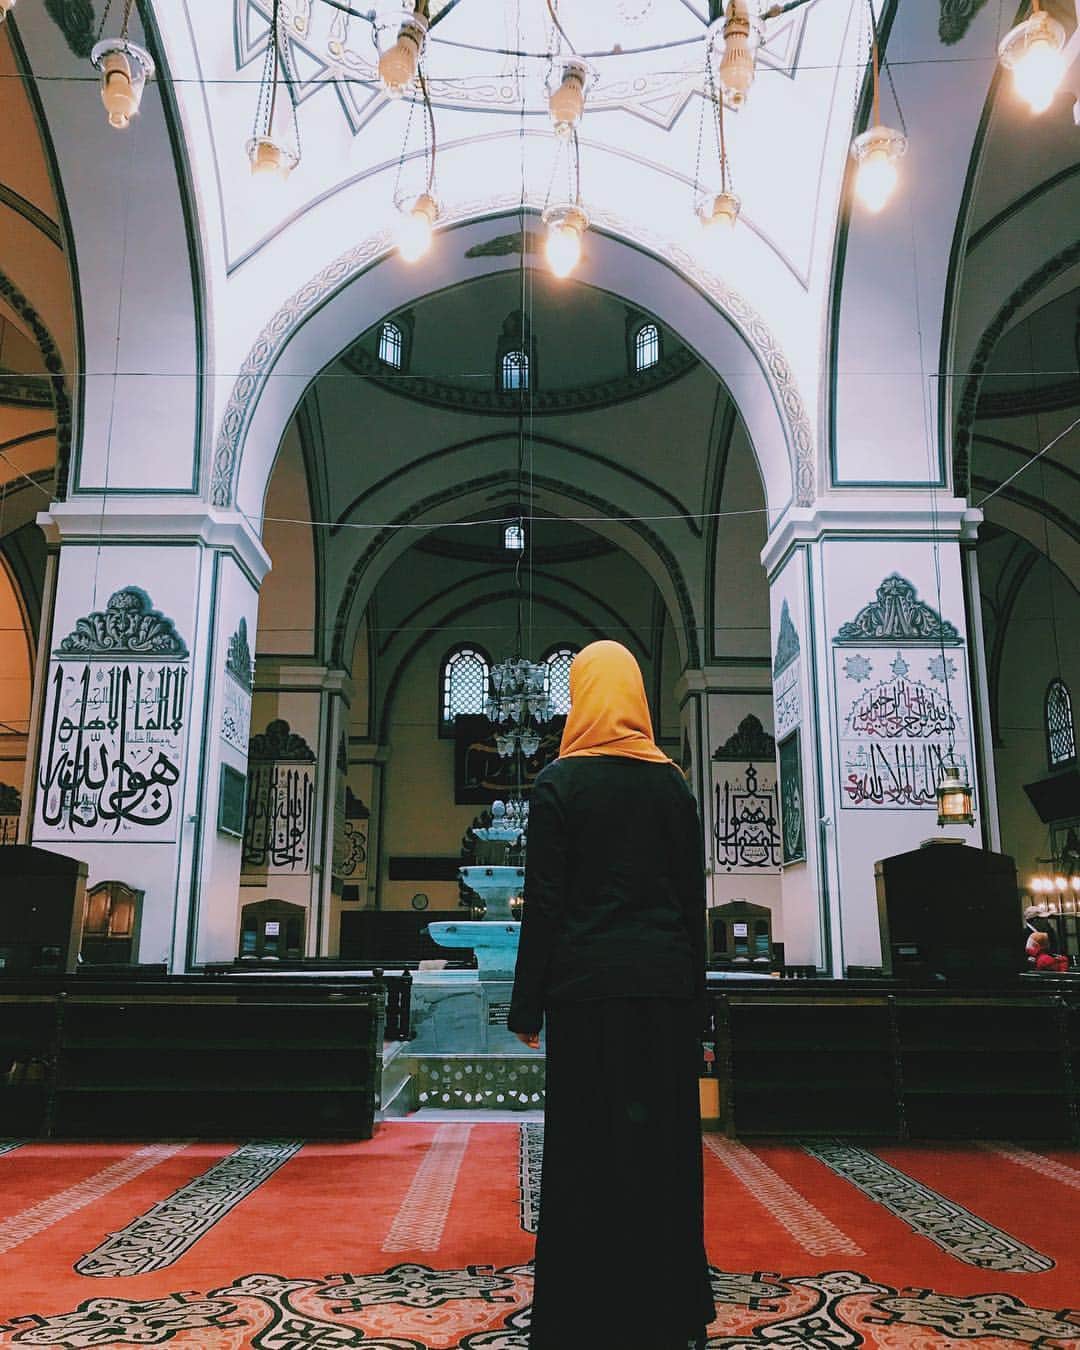 Risa Mizunoのインスタグラム：「Yes it's 🇹🇷❤️ Dear sisters in Turkey, thank you so much for your kind comments and messages to welcome us 😘 We will travel across the country for a week! Yesterday we visited Grand Mosque in Bursa and learned part of the history in Islam here. Alhamdulillah✨  #japanesemuslim #muslim #muslimah #japanese #japan #tokyo #malaysia #muslimahtokyo #travel #travelblogger #travelgram #travellover #travellife #hijab #tudung #turkey #istanbul #bursa #日本人ムスリム #日本 #東京 #マレーシア #国際結婚 #🇲🇾 #❤️ #🇯🇵 #トルコ #🇹🇷」